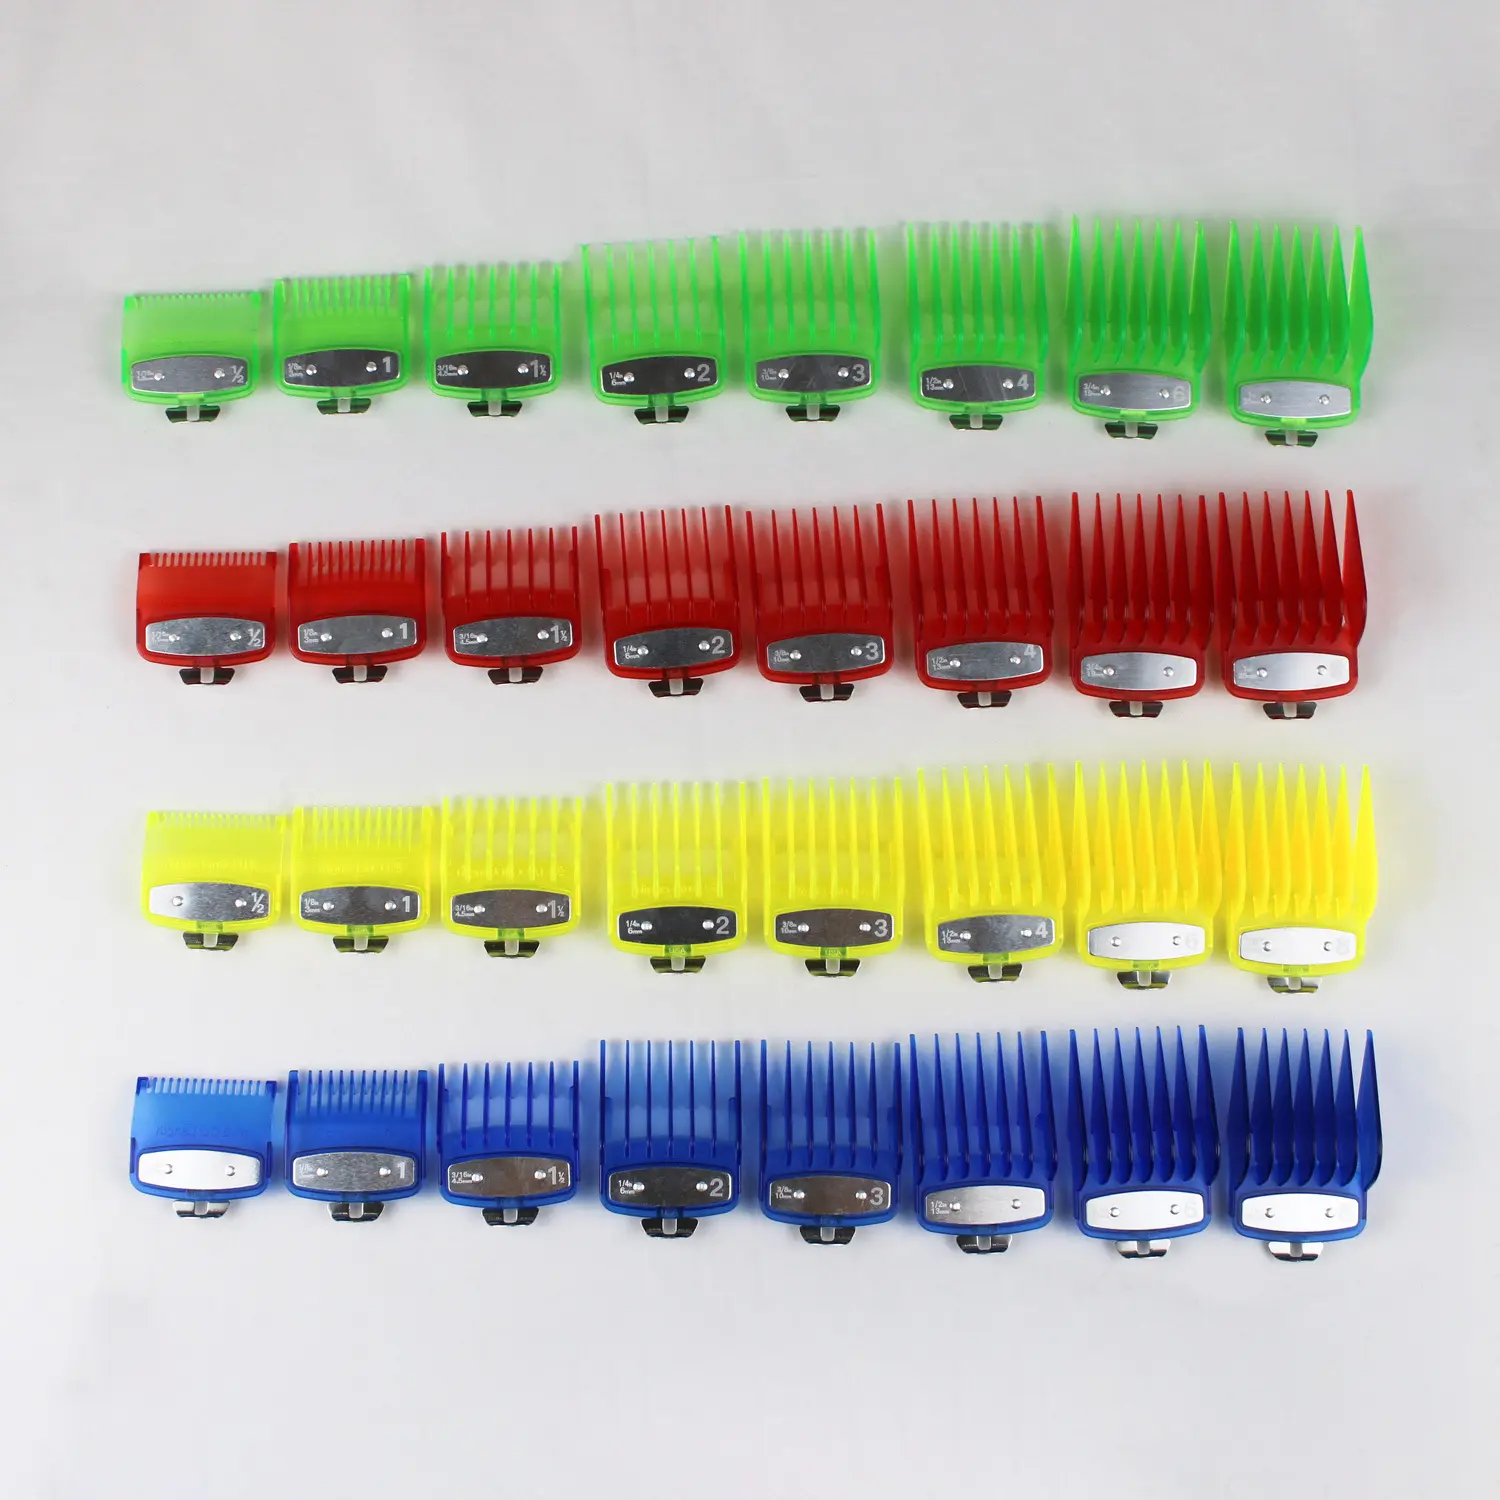 Hair Clipper Limit Comb Fit Barber shop Hair Cutting Guides Combs Accessory With Metal Clip 10 Kind Cutting Lengths Guards Set